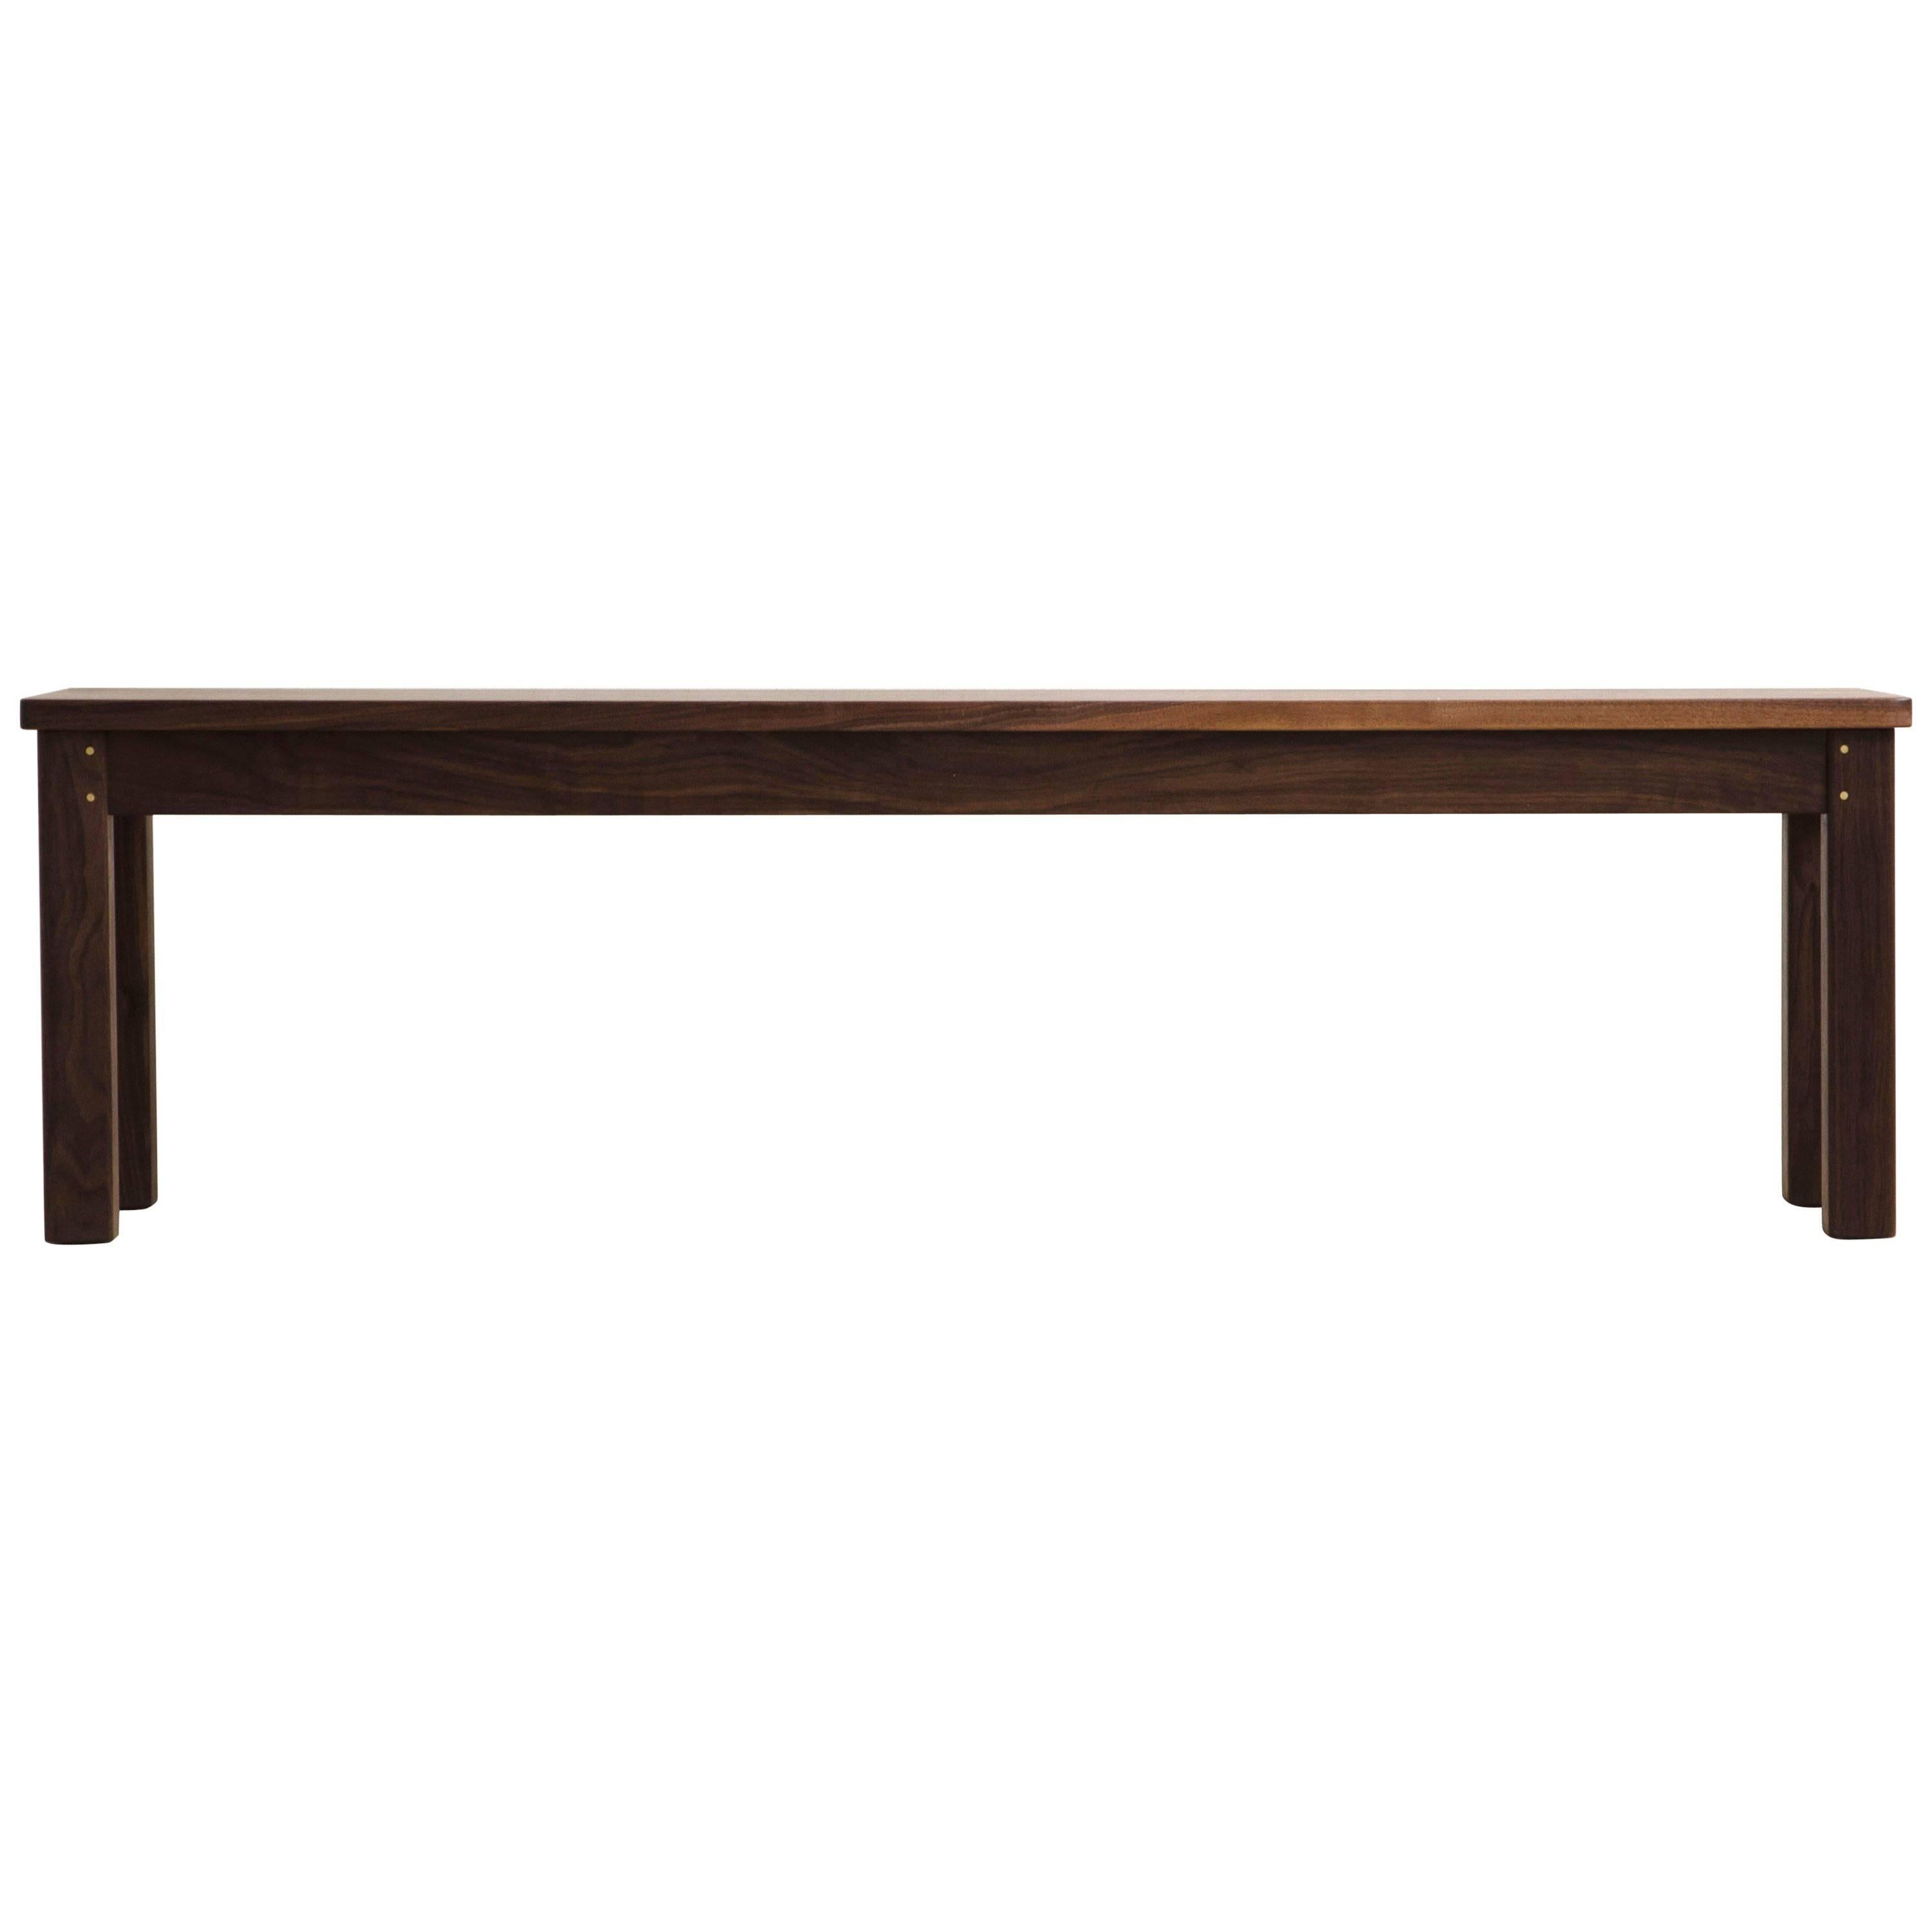 Large "Lore" Solid Wood Bench in Black Walnut, Modern Shaker-Style For Sale